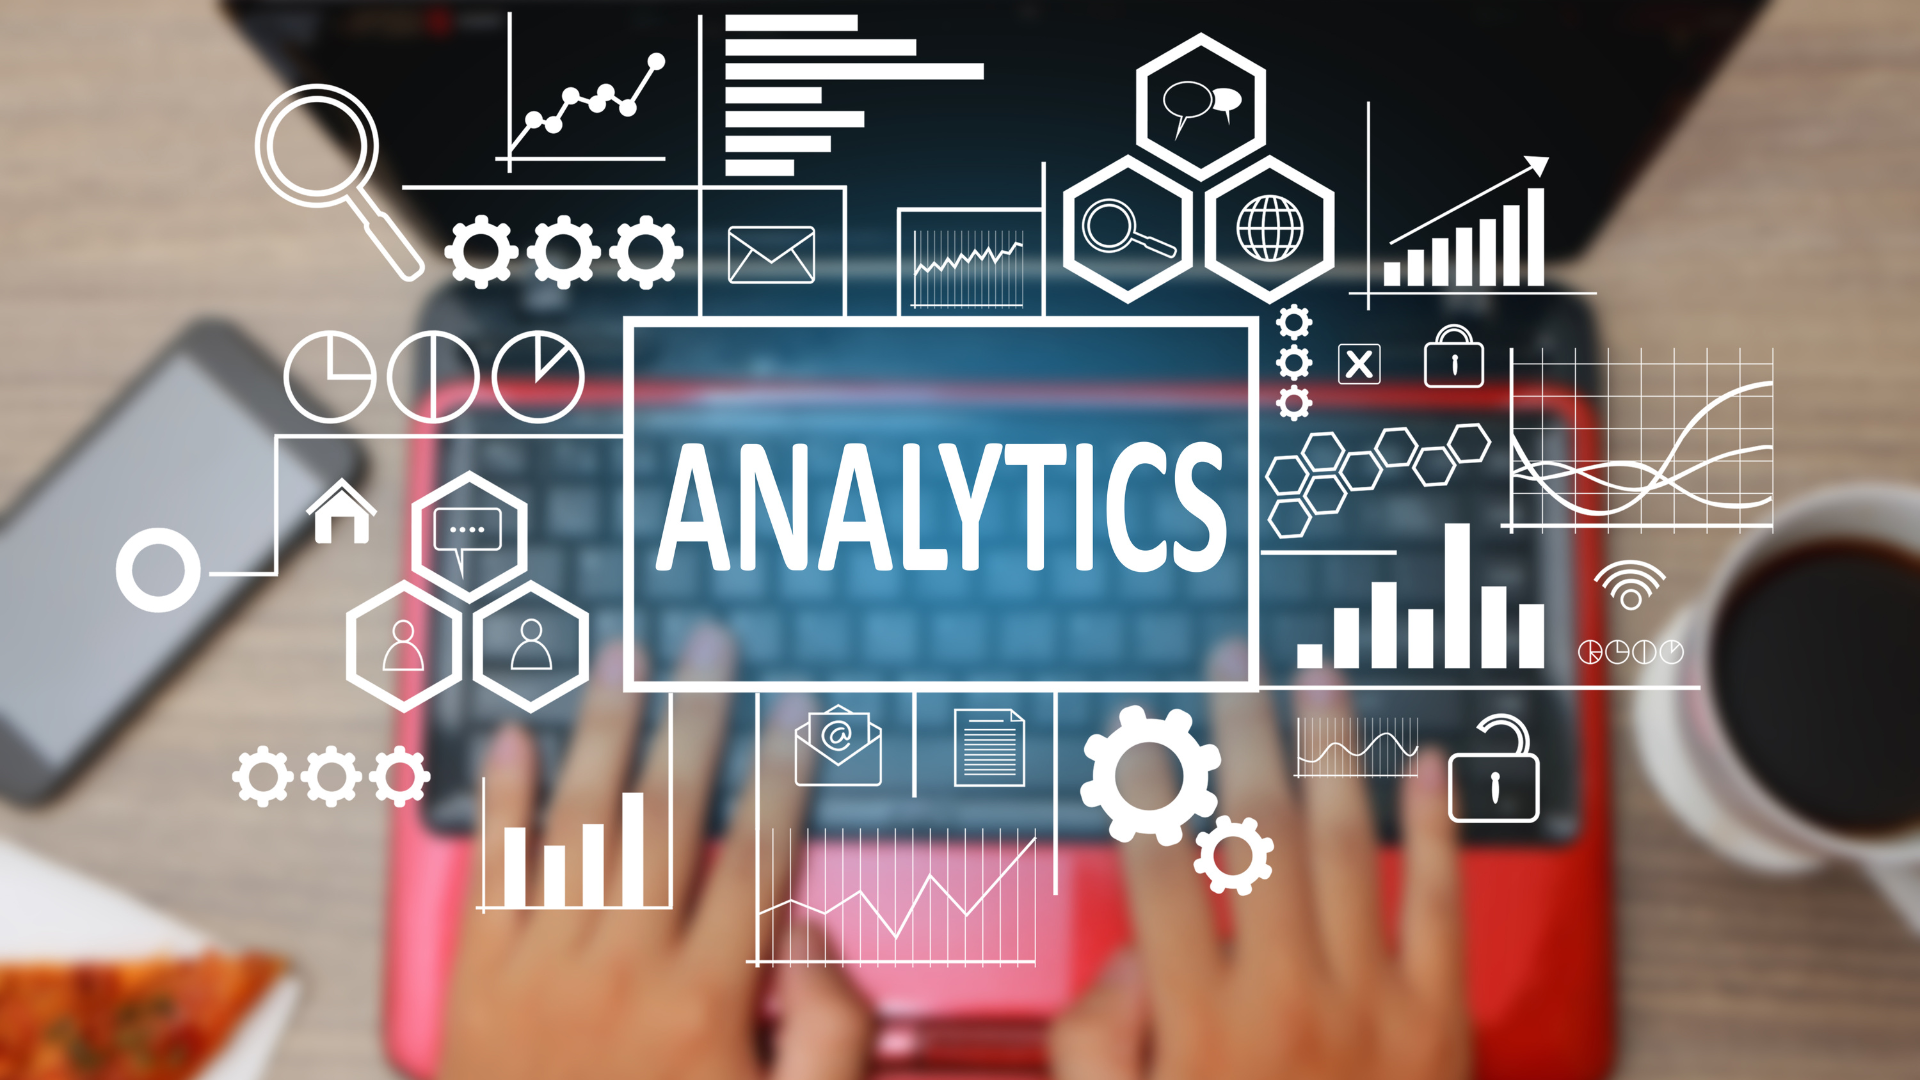 Self-service SAP business analytics solutions enable you to converse with your data – here’s how